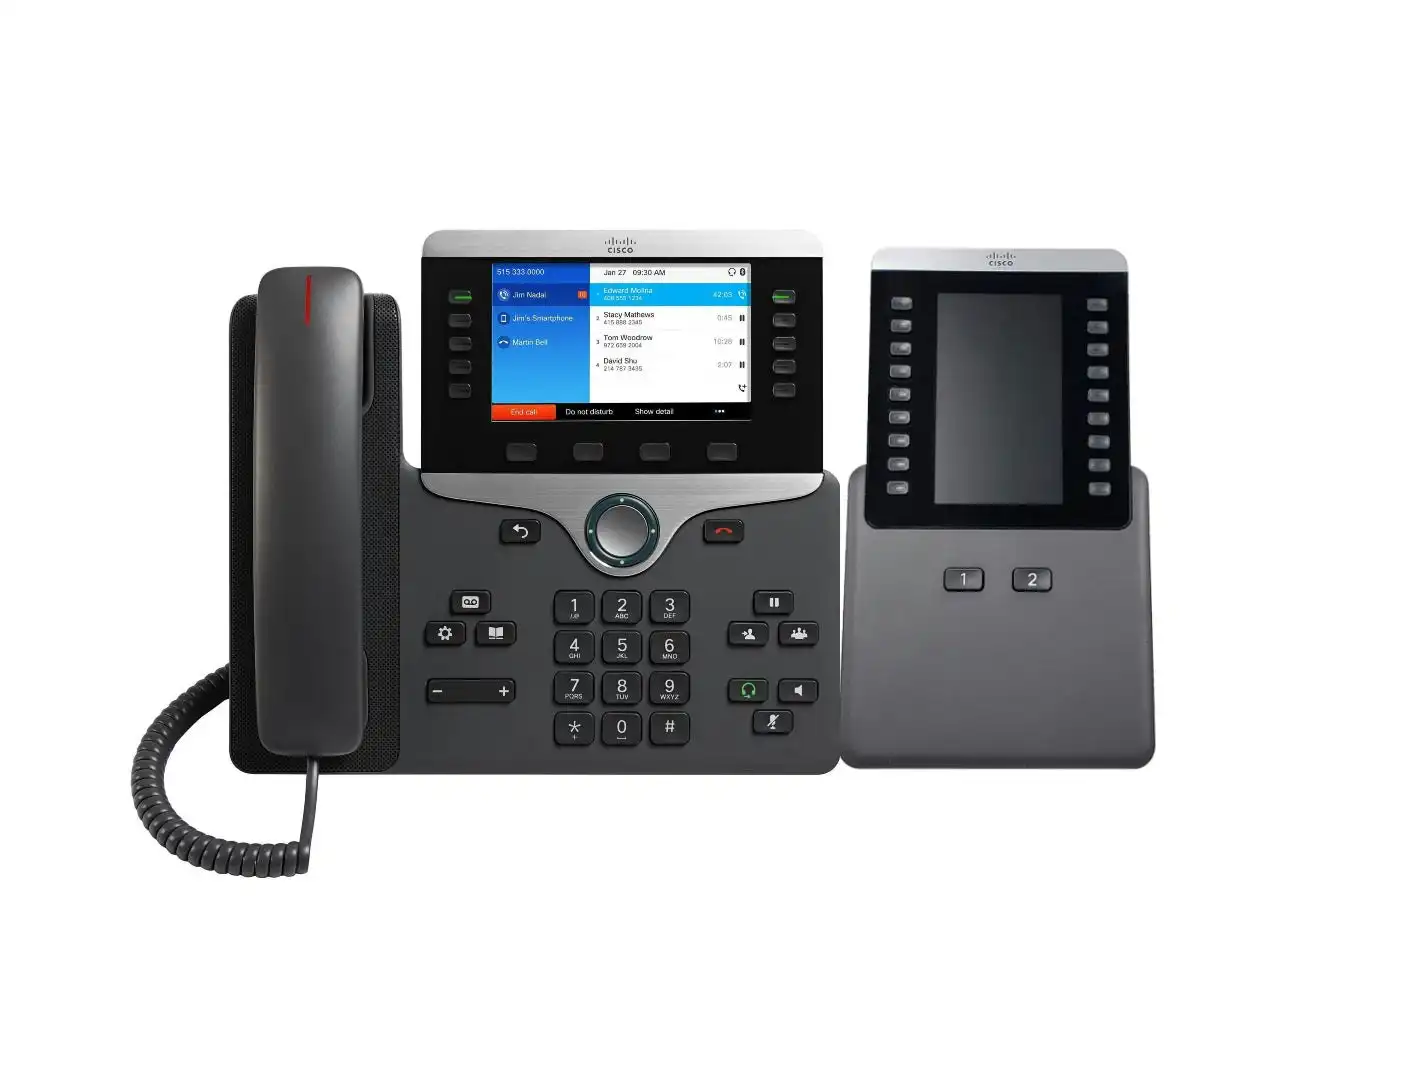 Refurbished Cisco Unified IP Phone 8851 with Cisco 8800 Key Expansion Module